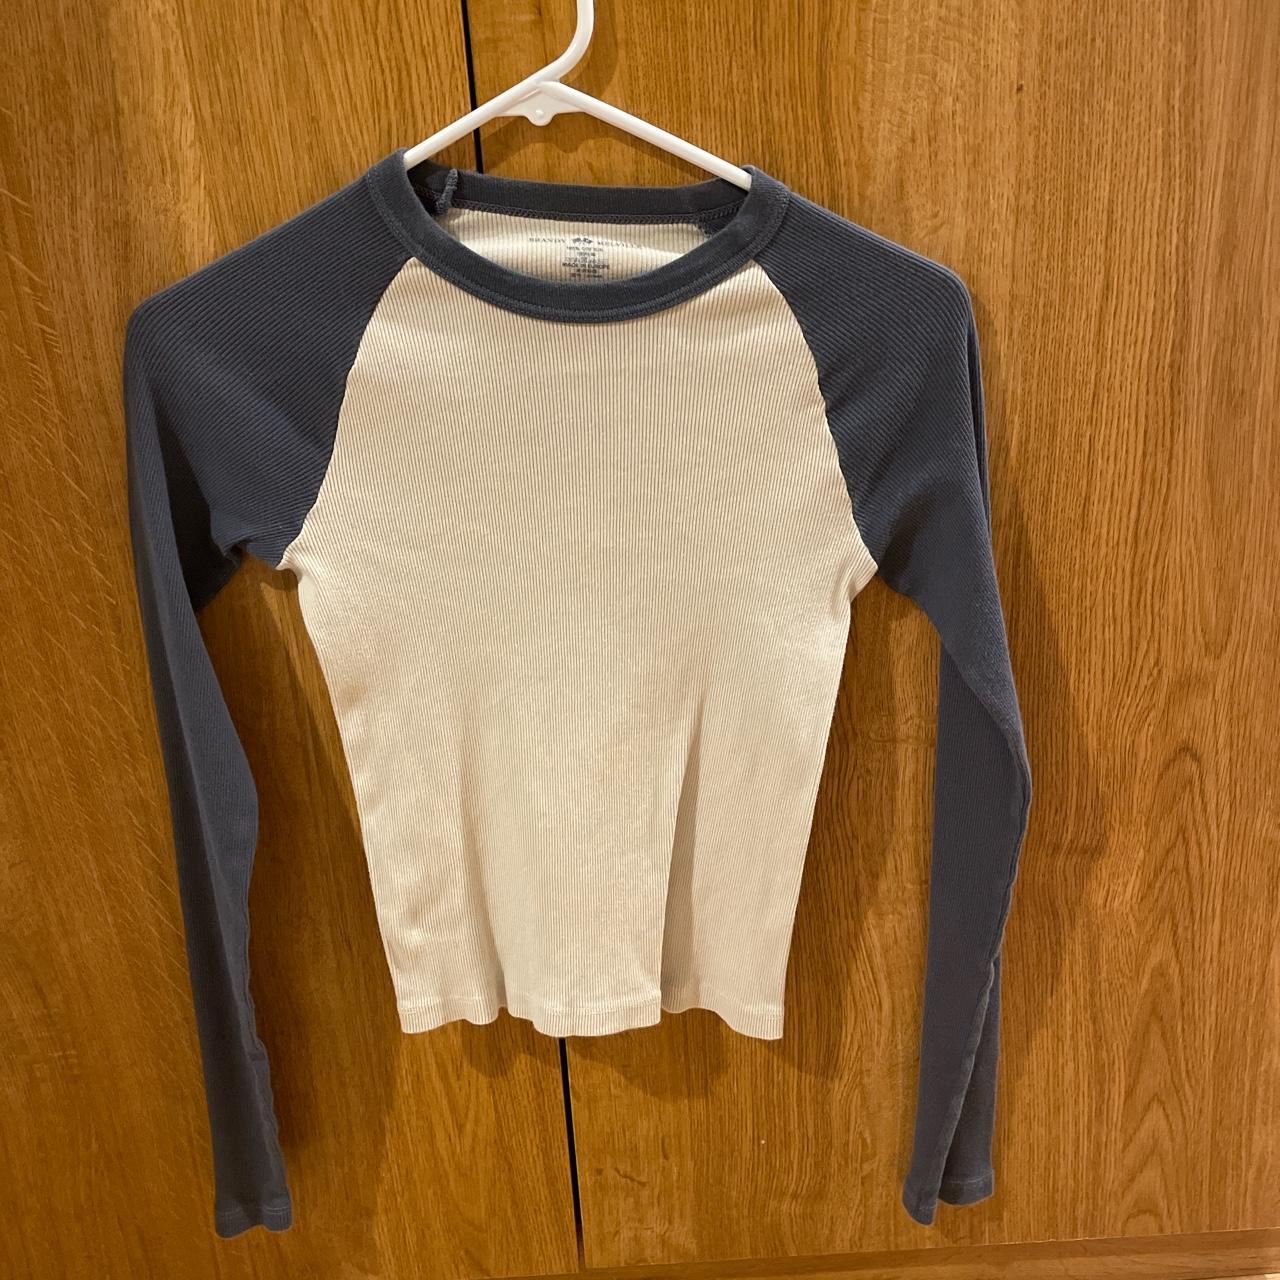 Brandy Melville baseball tee Form fitting and... - Depop